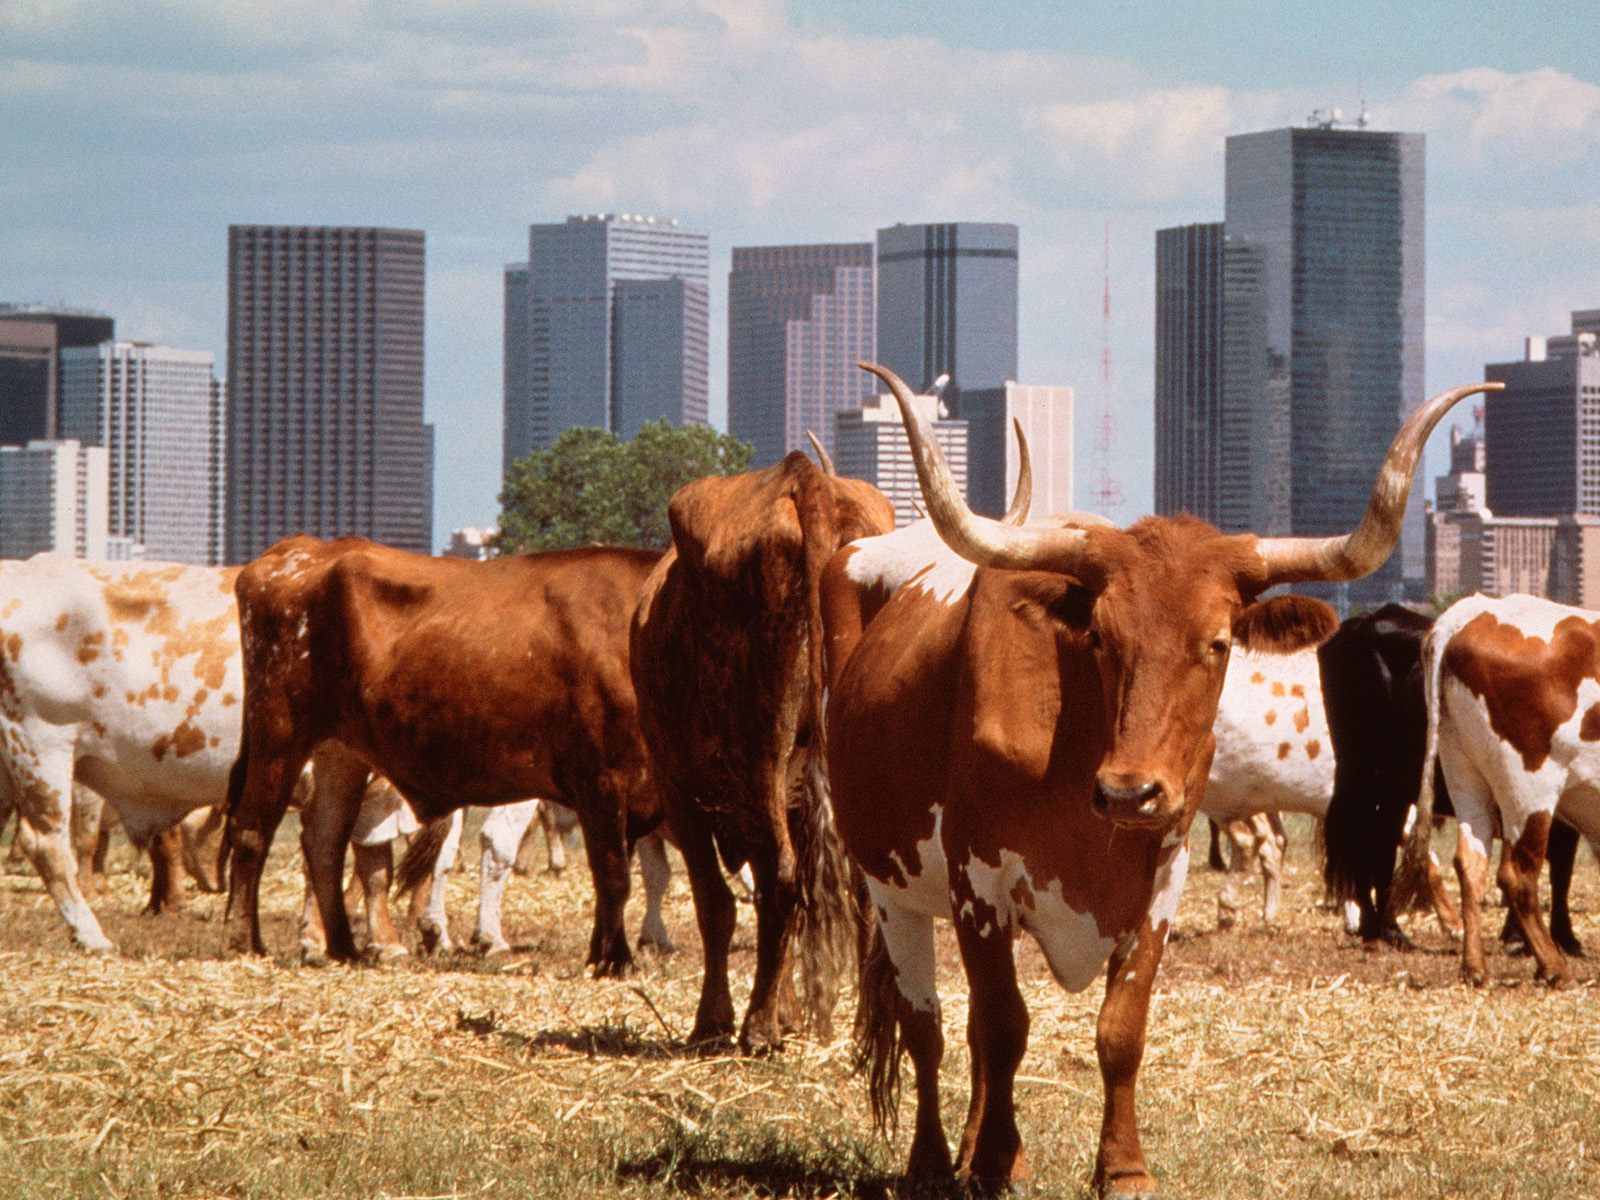 Wallpapers Animals AT DALLAS TEXAS CATTLES NEAR THE CITY PICTURES